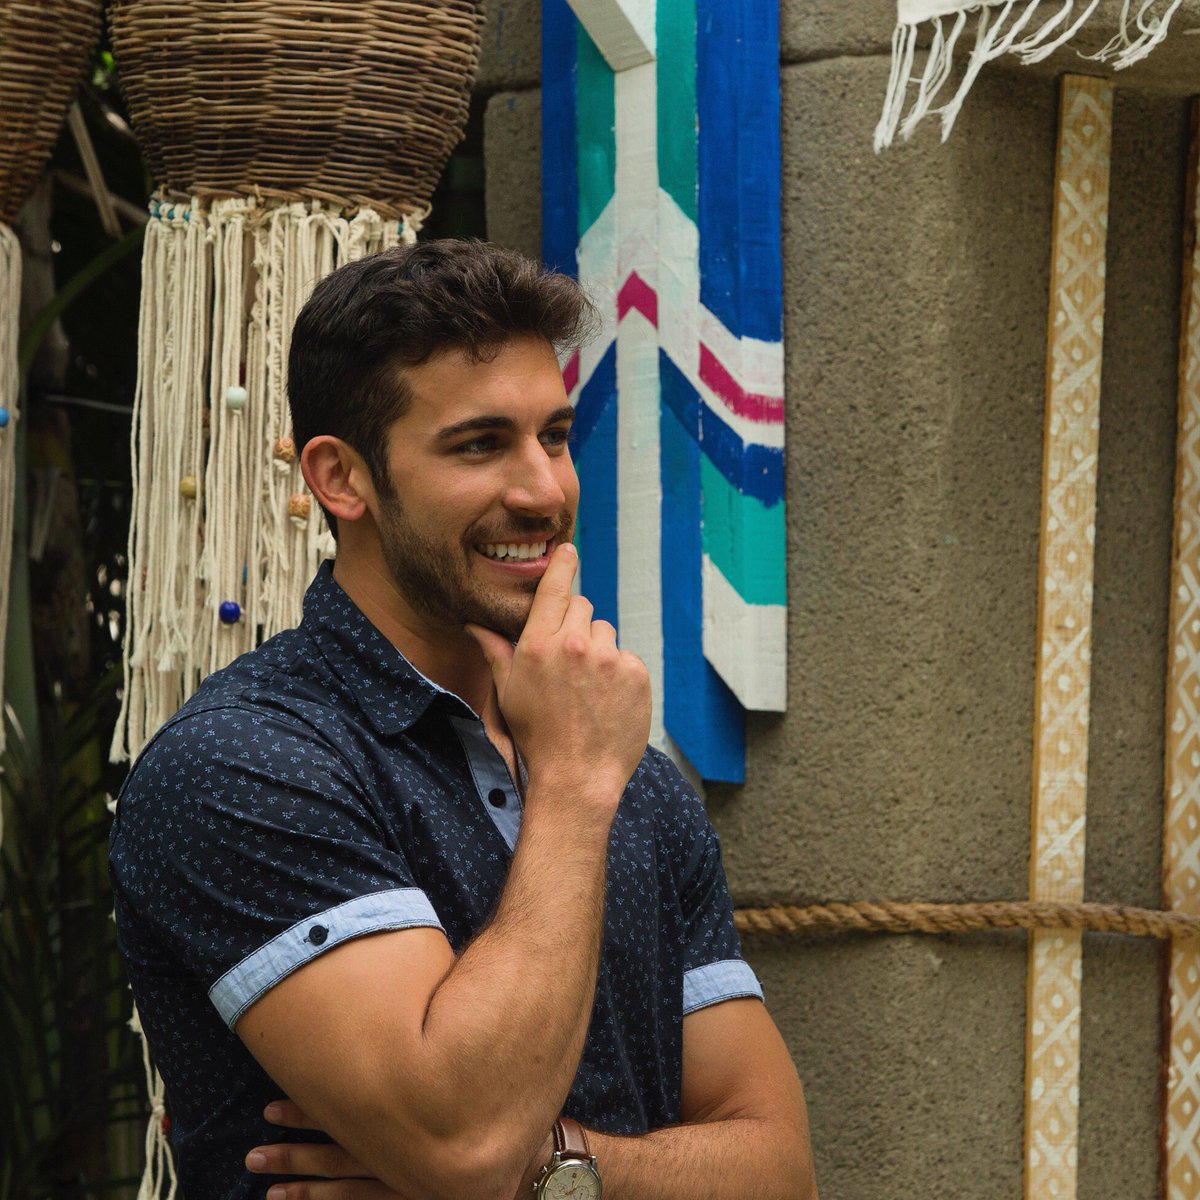 Derek Peth Bachelor in Paradise,Contestant,Wiki,Bio,Age,Profile,Images,Girlfriend | Full Details